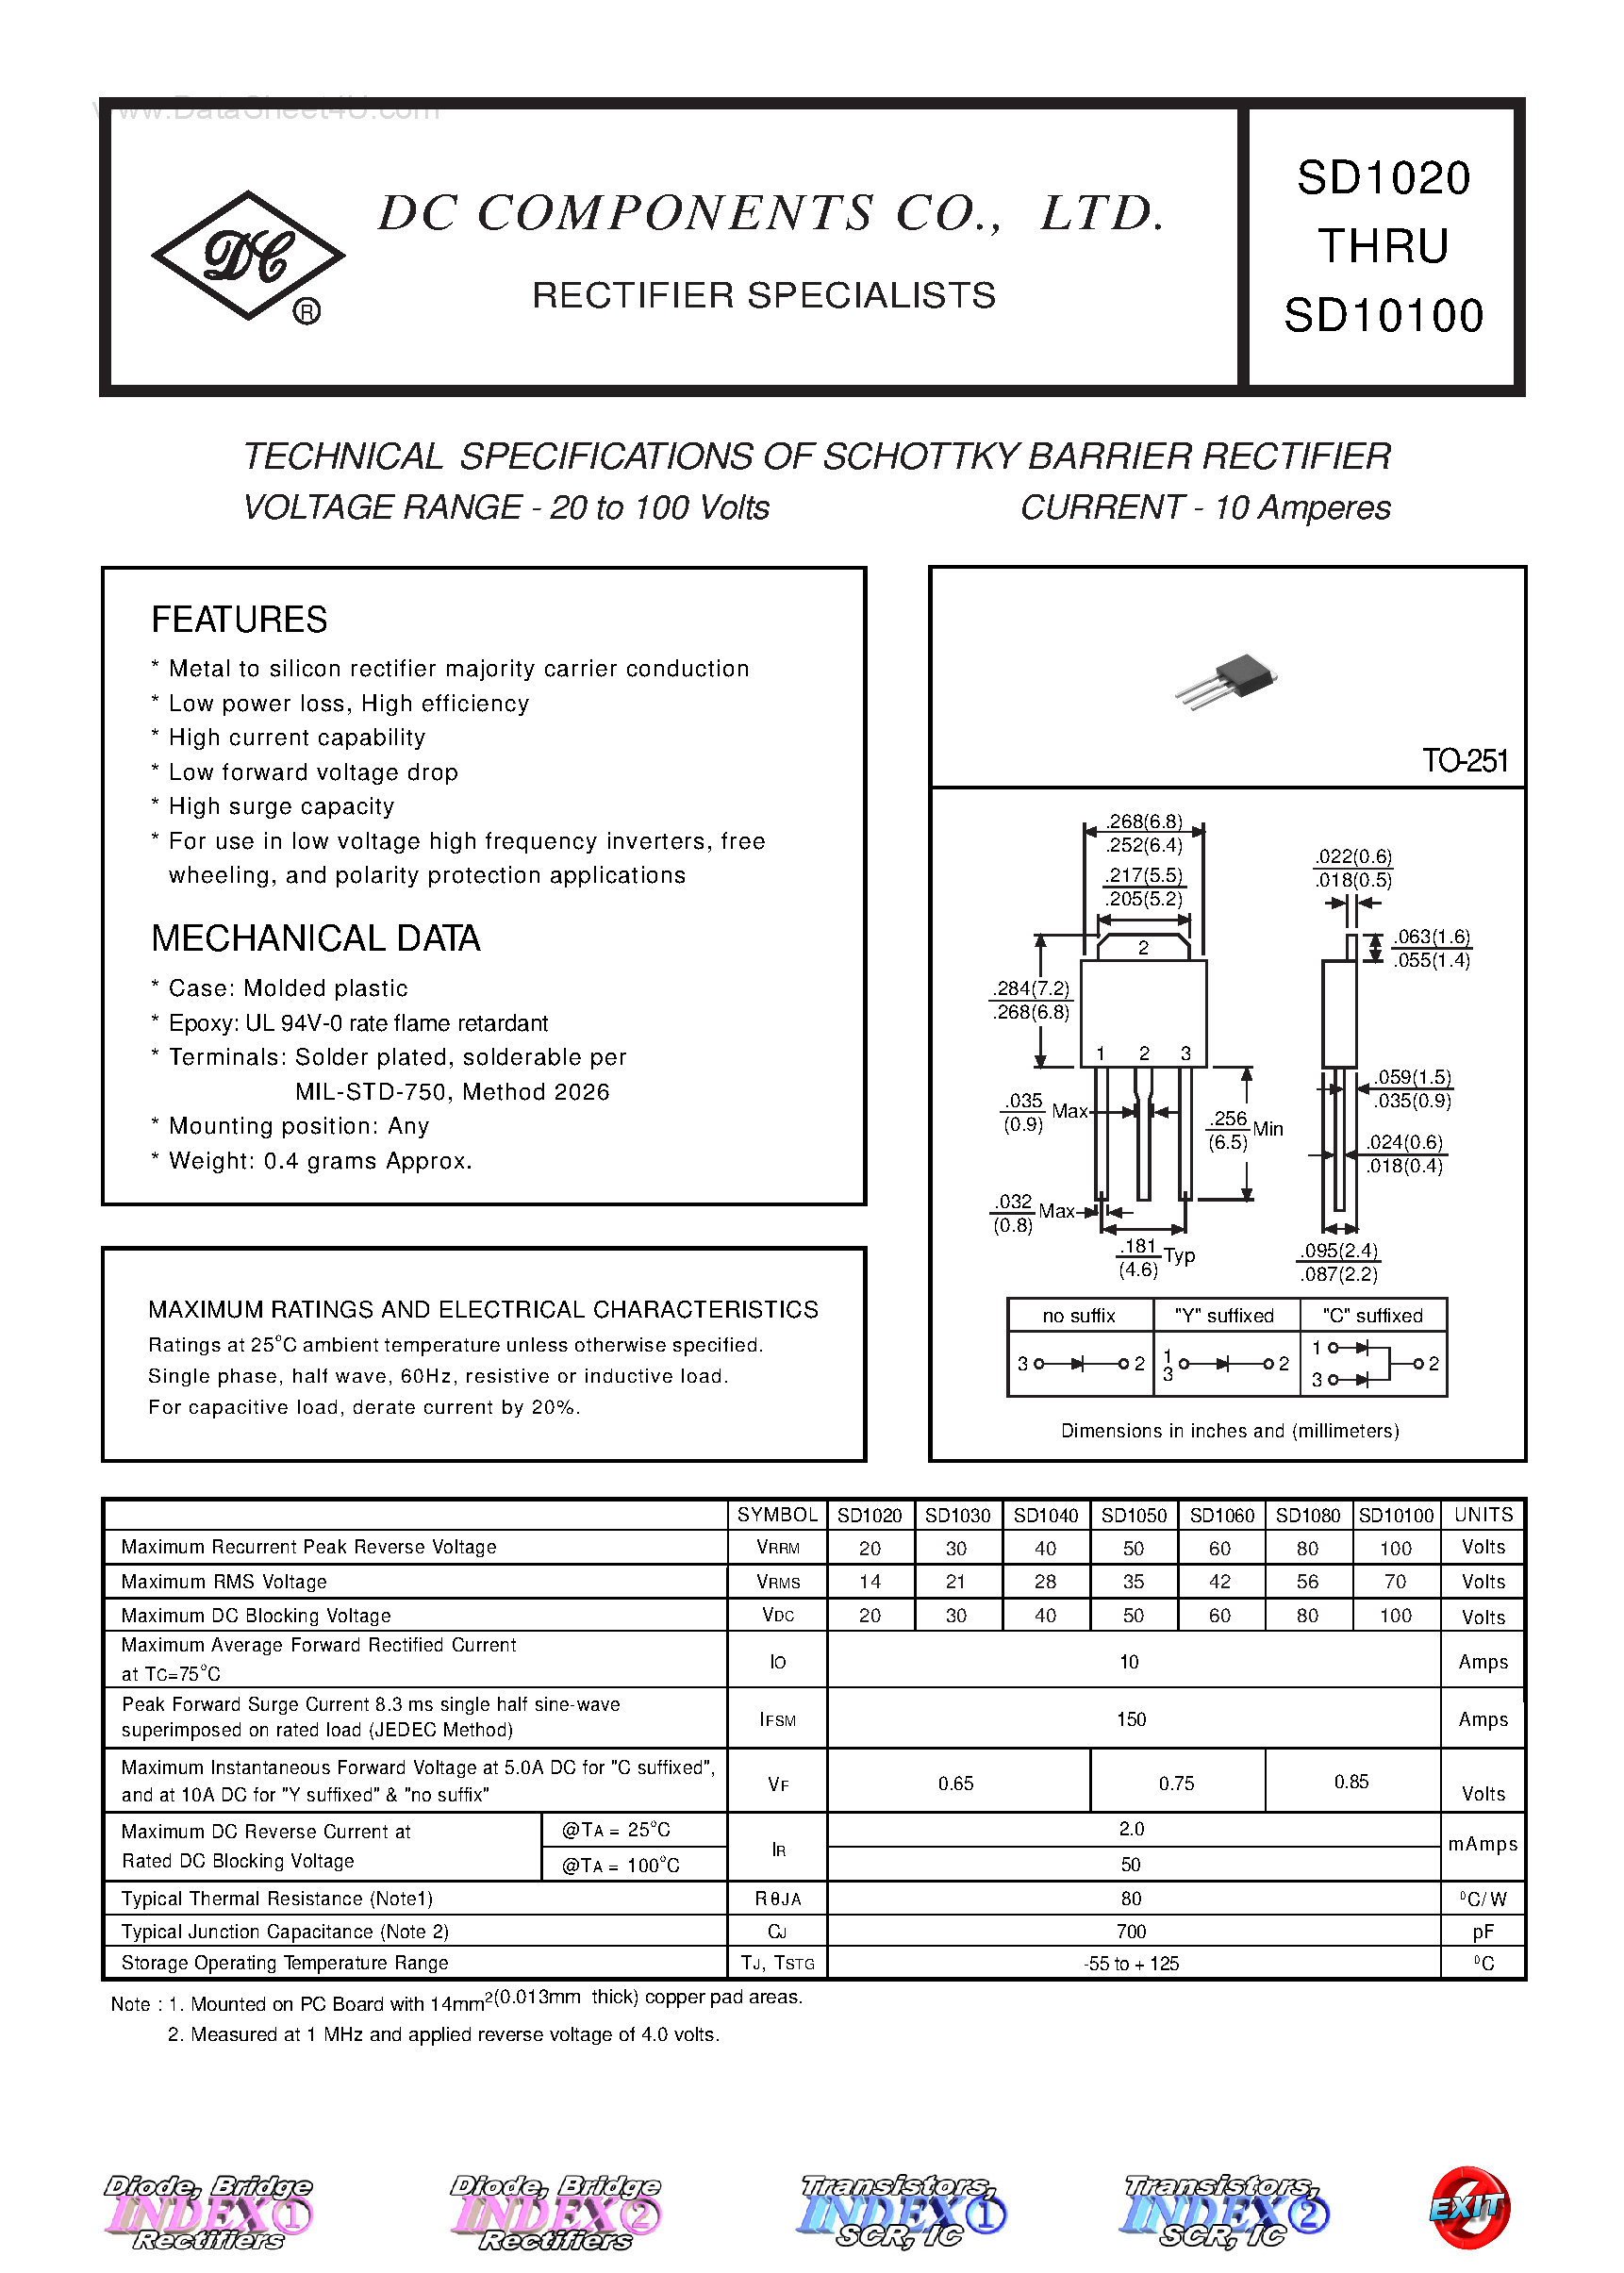 Datasheet SD10100 - (SD1020 - SD10100) TECHNICAL SPECIFICATIONS OF SCHOTTKY BARRIER RECTIFIER page 1